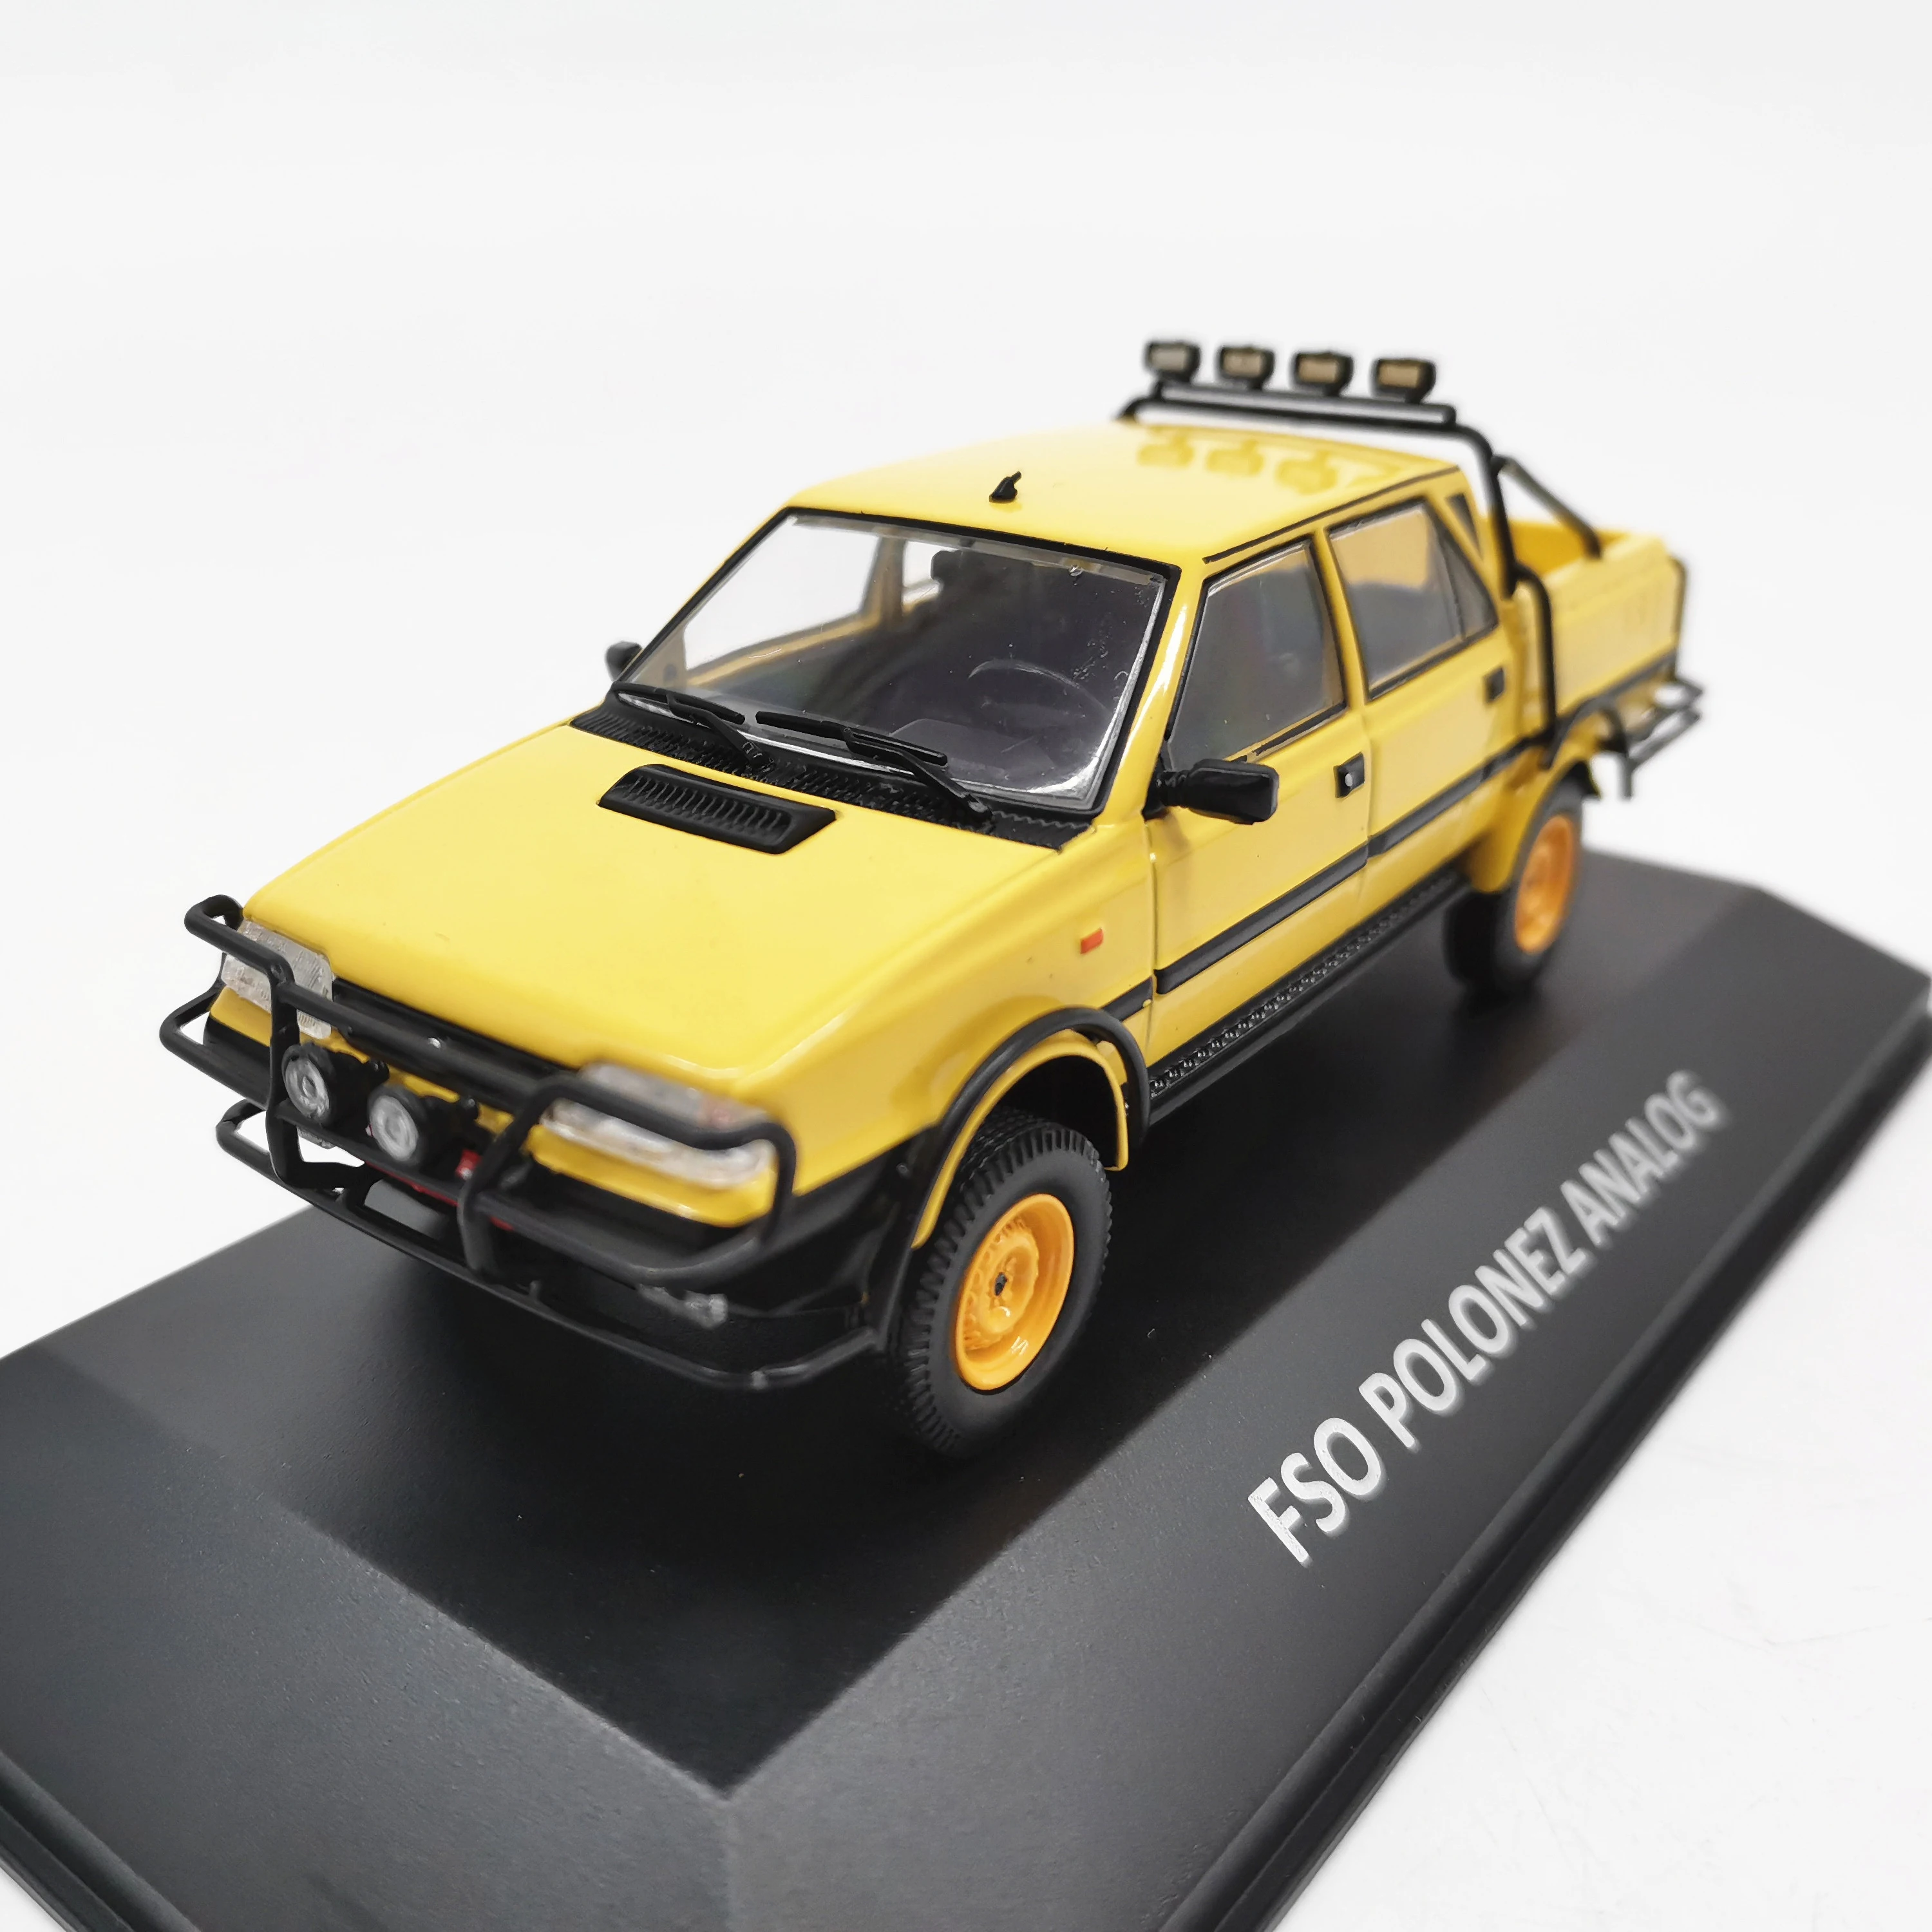 

Diecast 1/43 Scale POLONEZ Alloy Car Model FSO POLONEZ ANALOG Classic Nostalgic Car Model Collectible Toy Gift